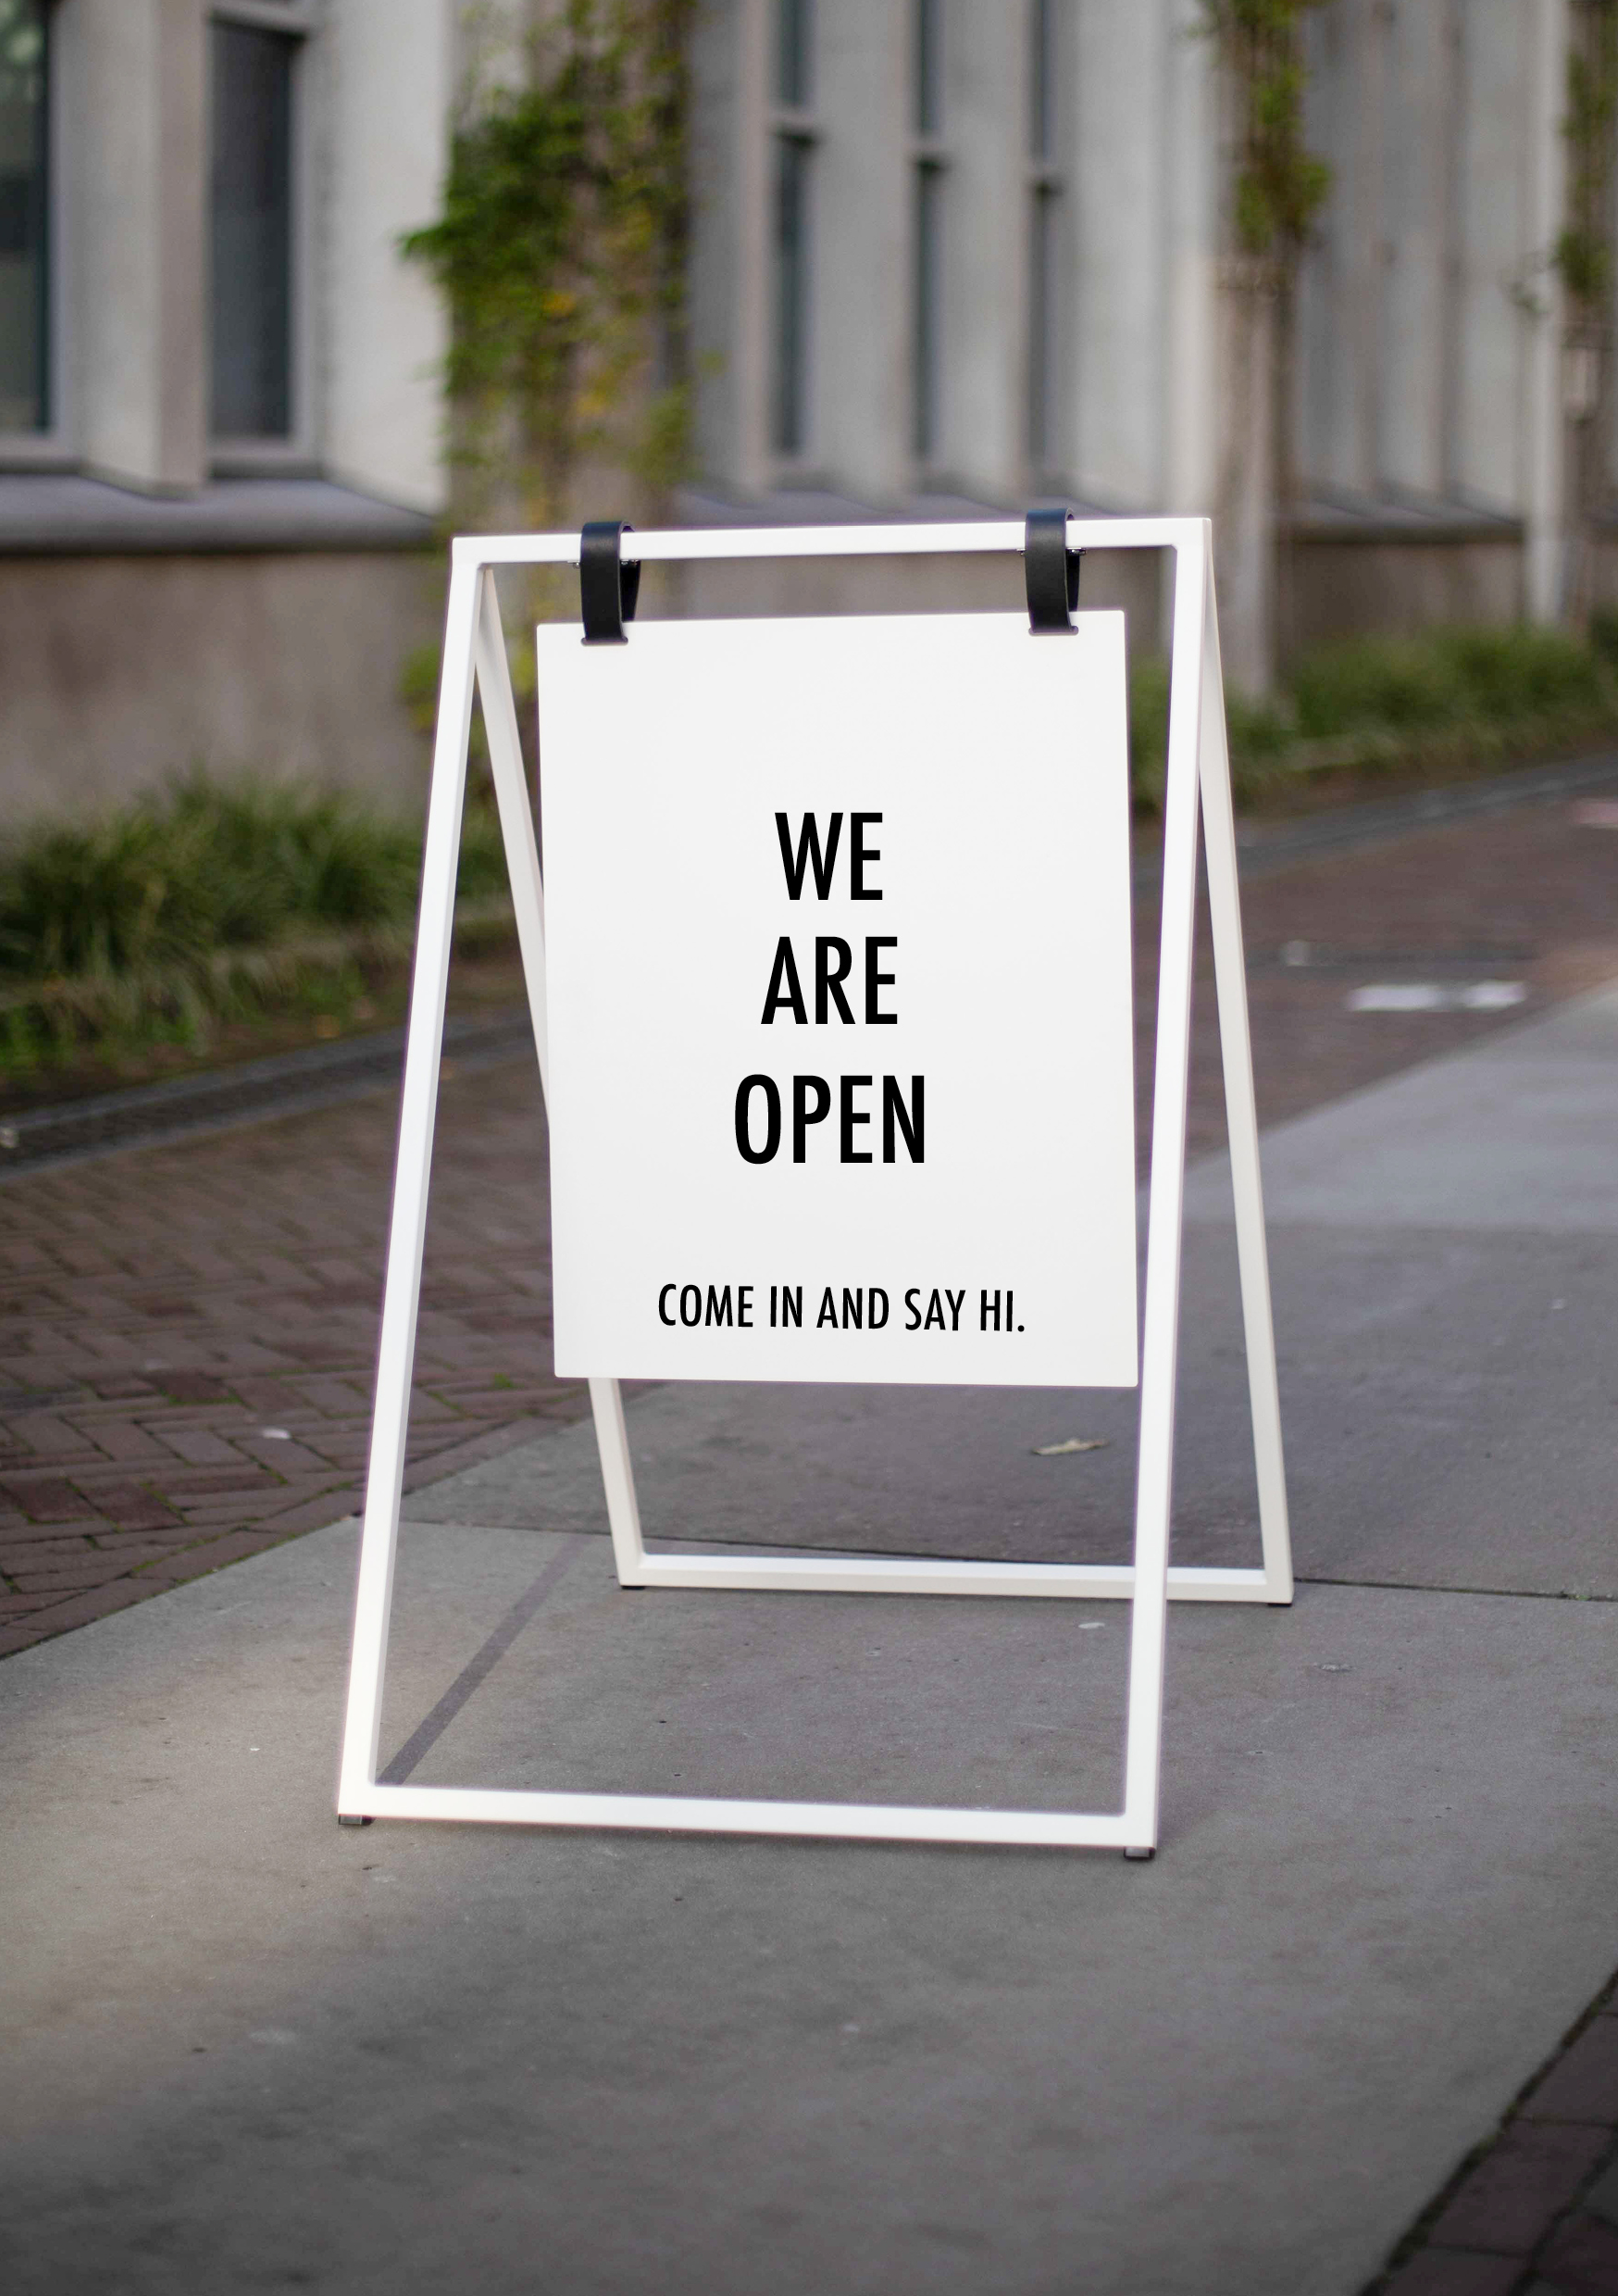 High quality steel sidewalk sign for your business. Shop sign for outdoor and indoor use.